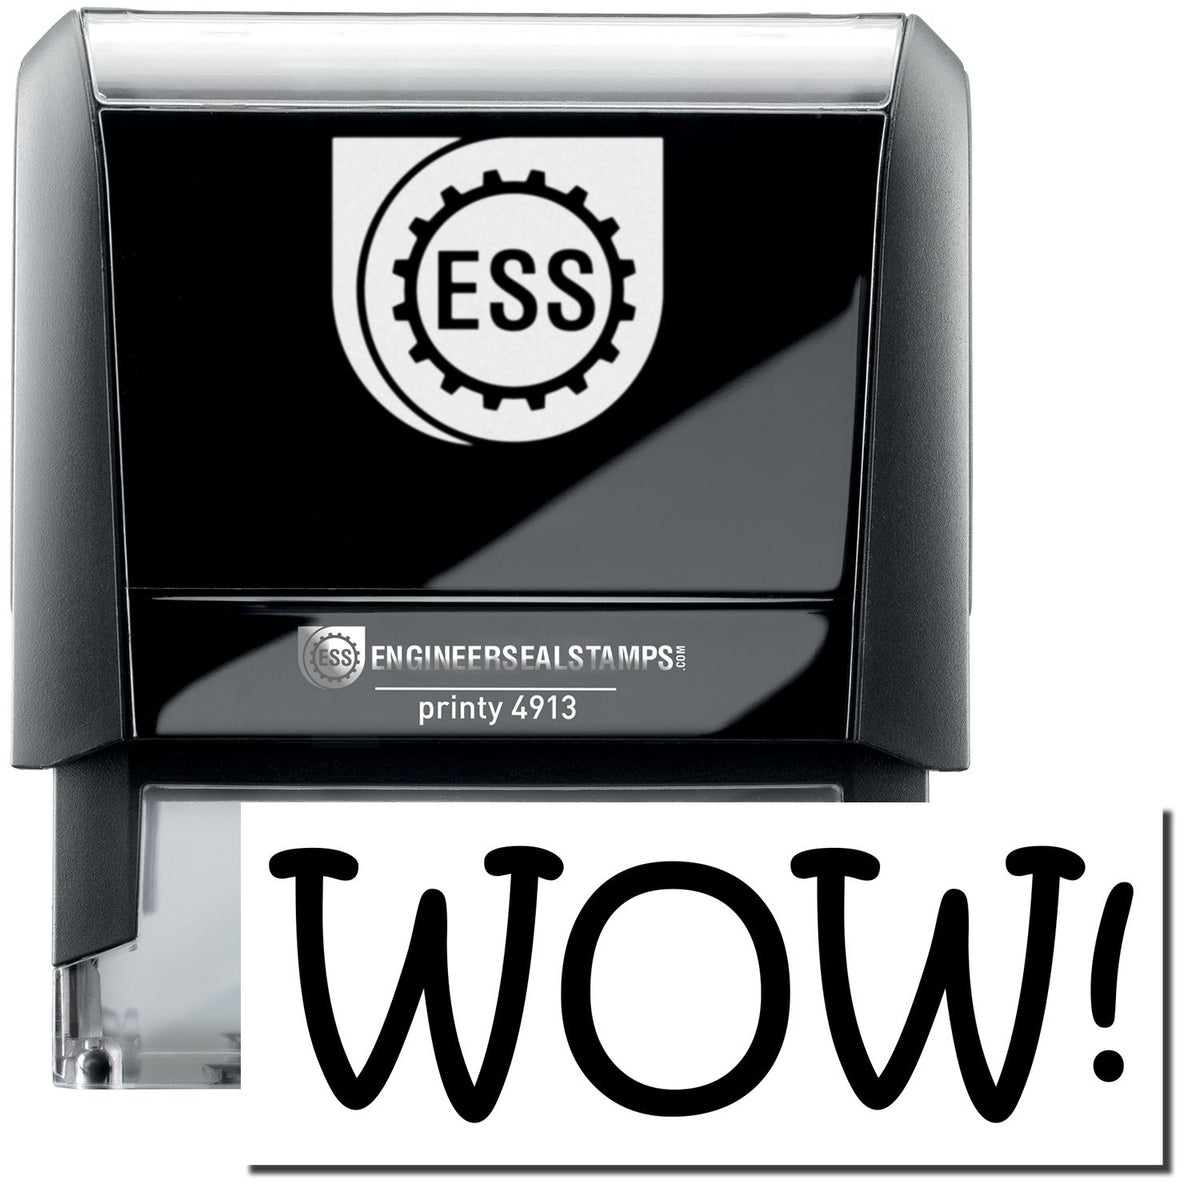 A self-inking stamp with a stamped image showing how the text &quot;WOW!&quot; in a large bold font is displayed by it after stamping.